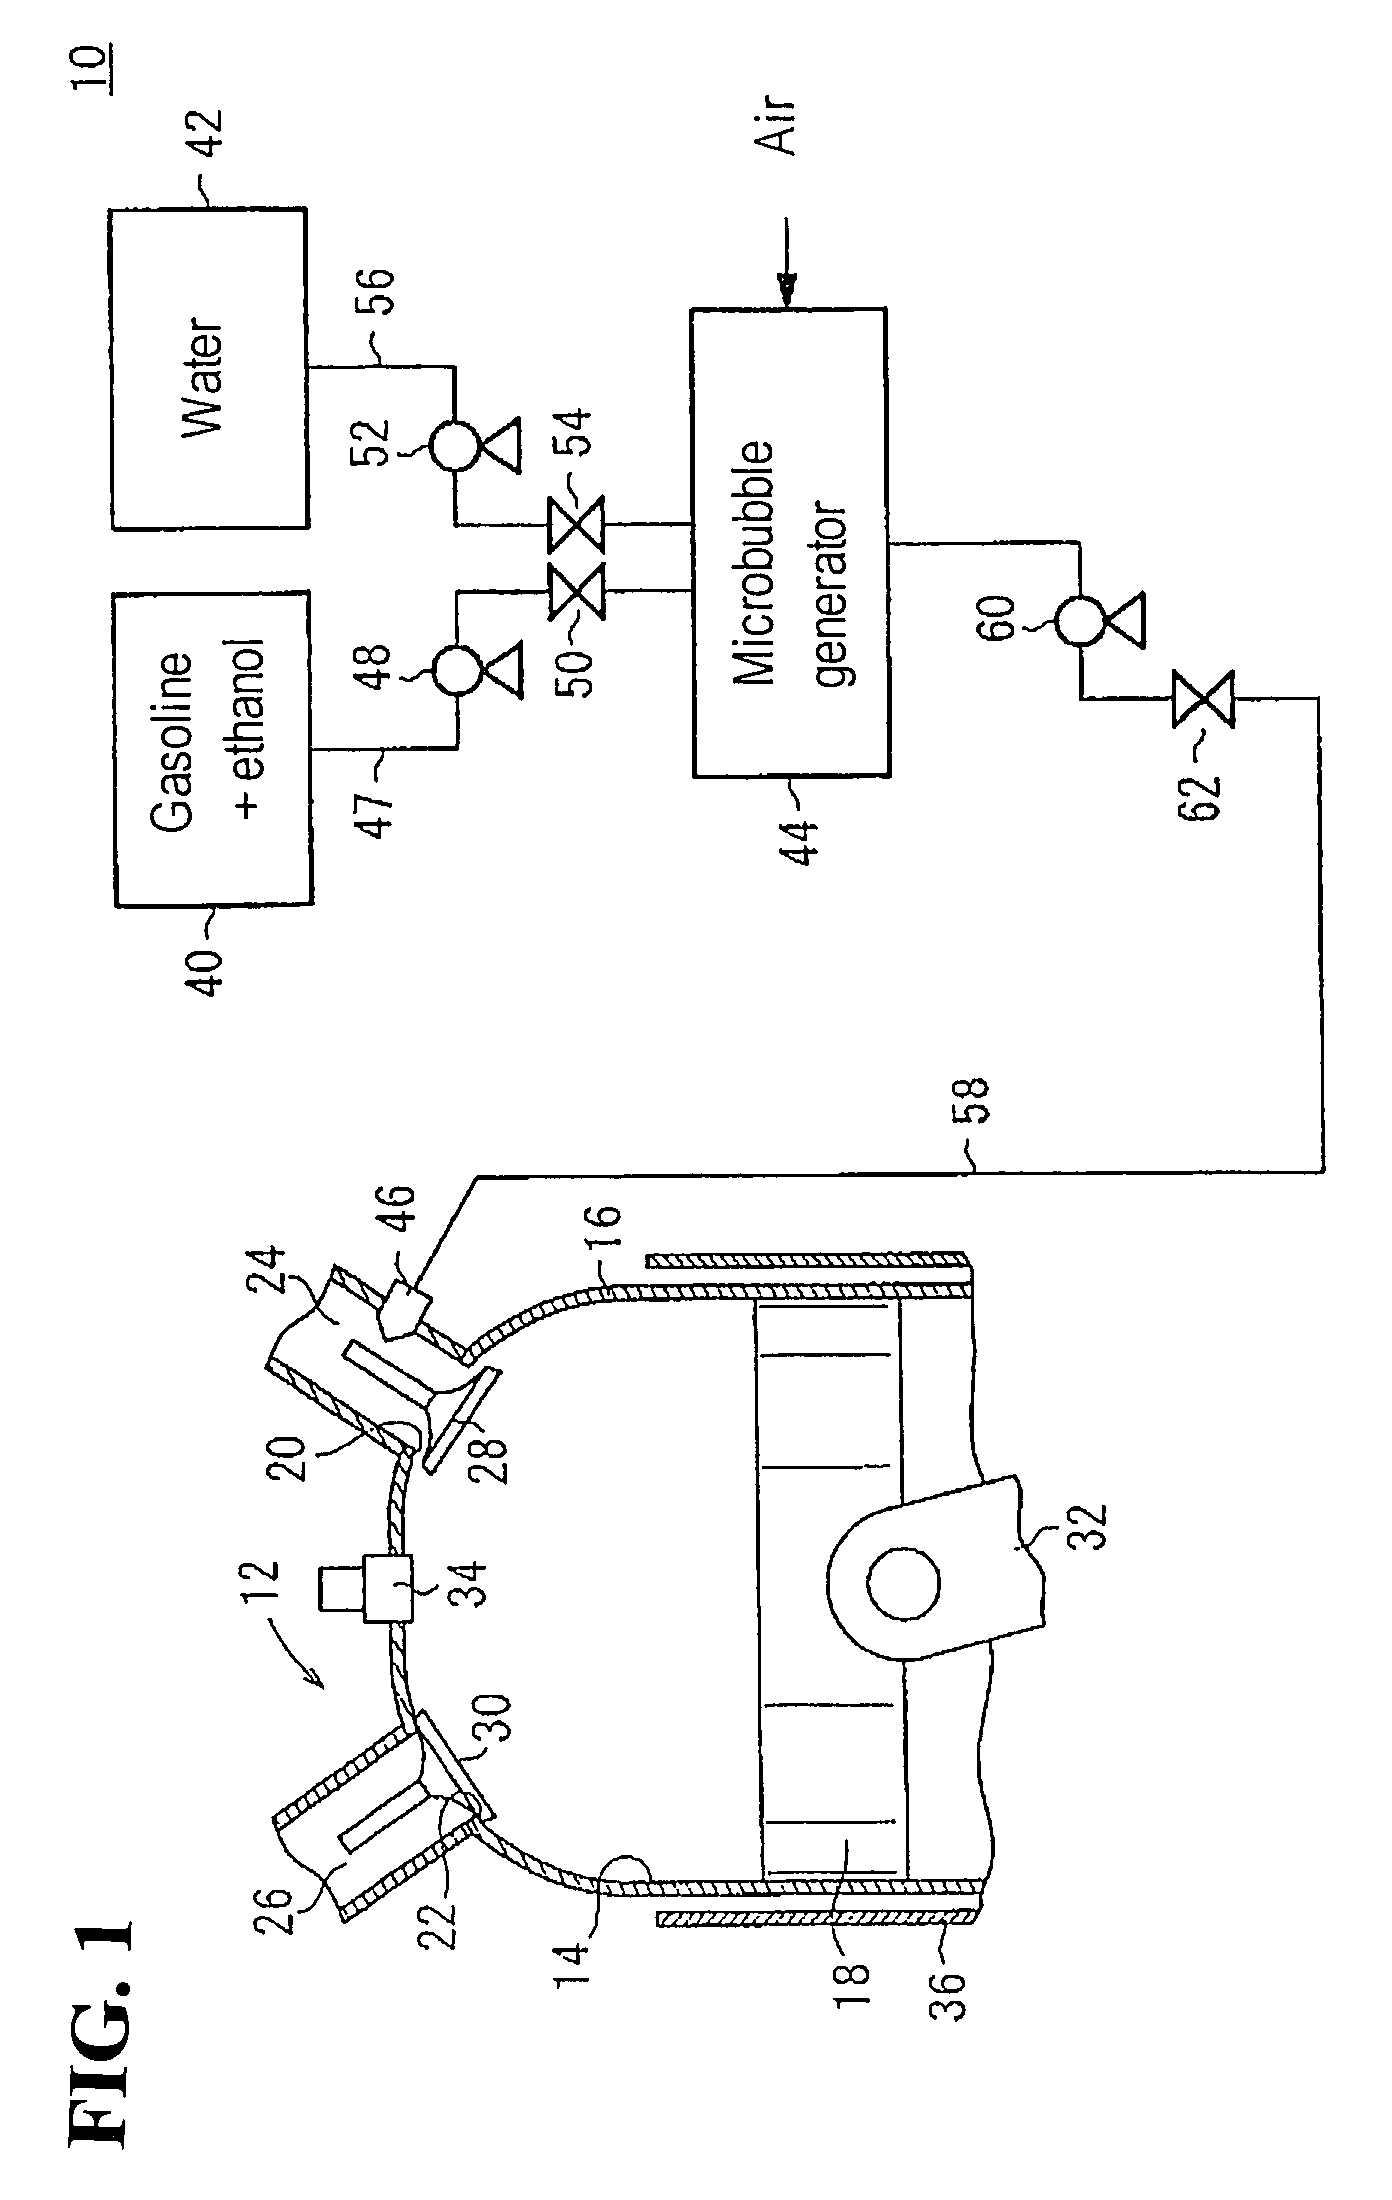 Operating method and fuel supply system for an internal combustion engine